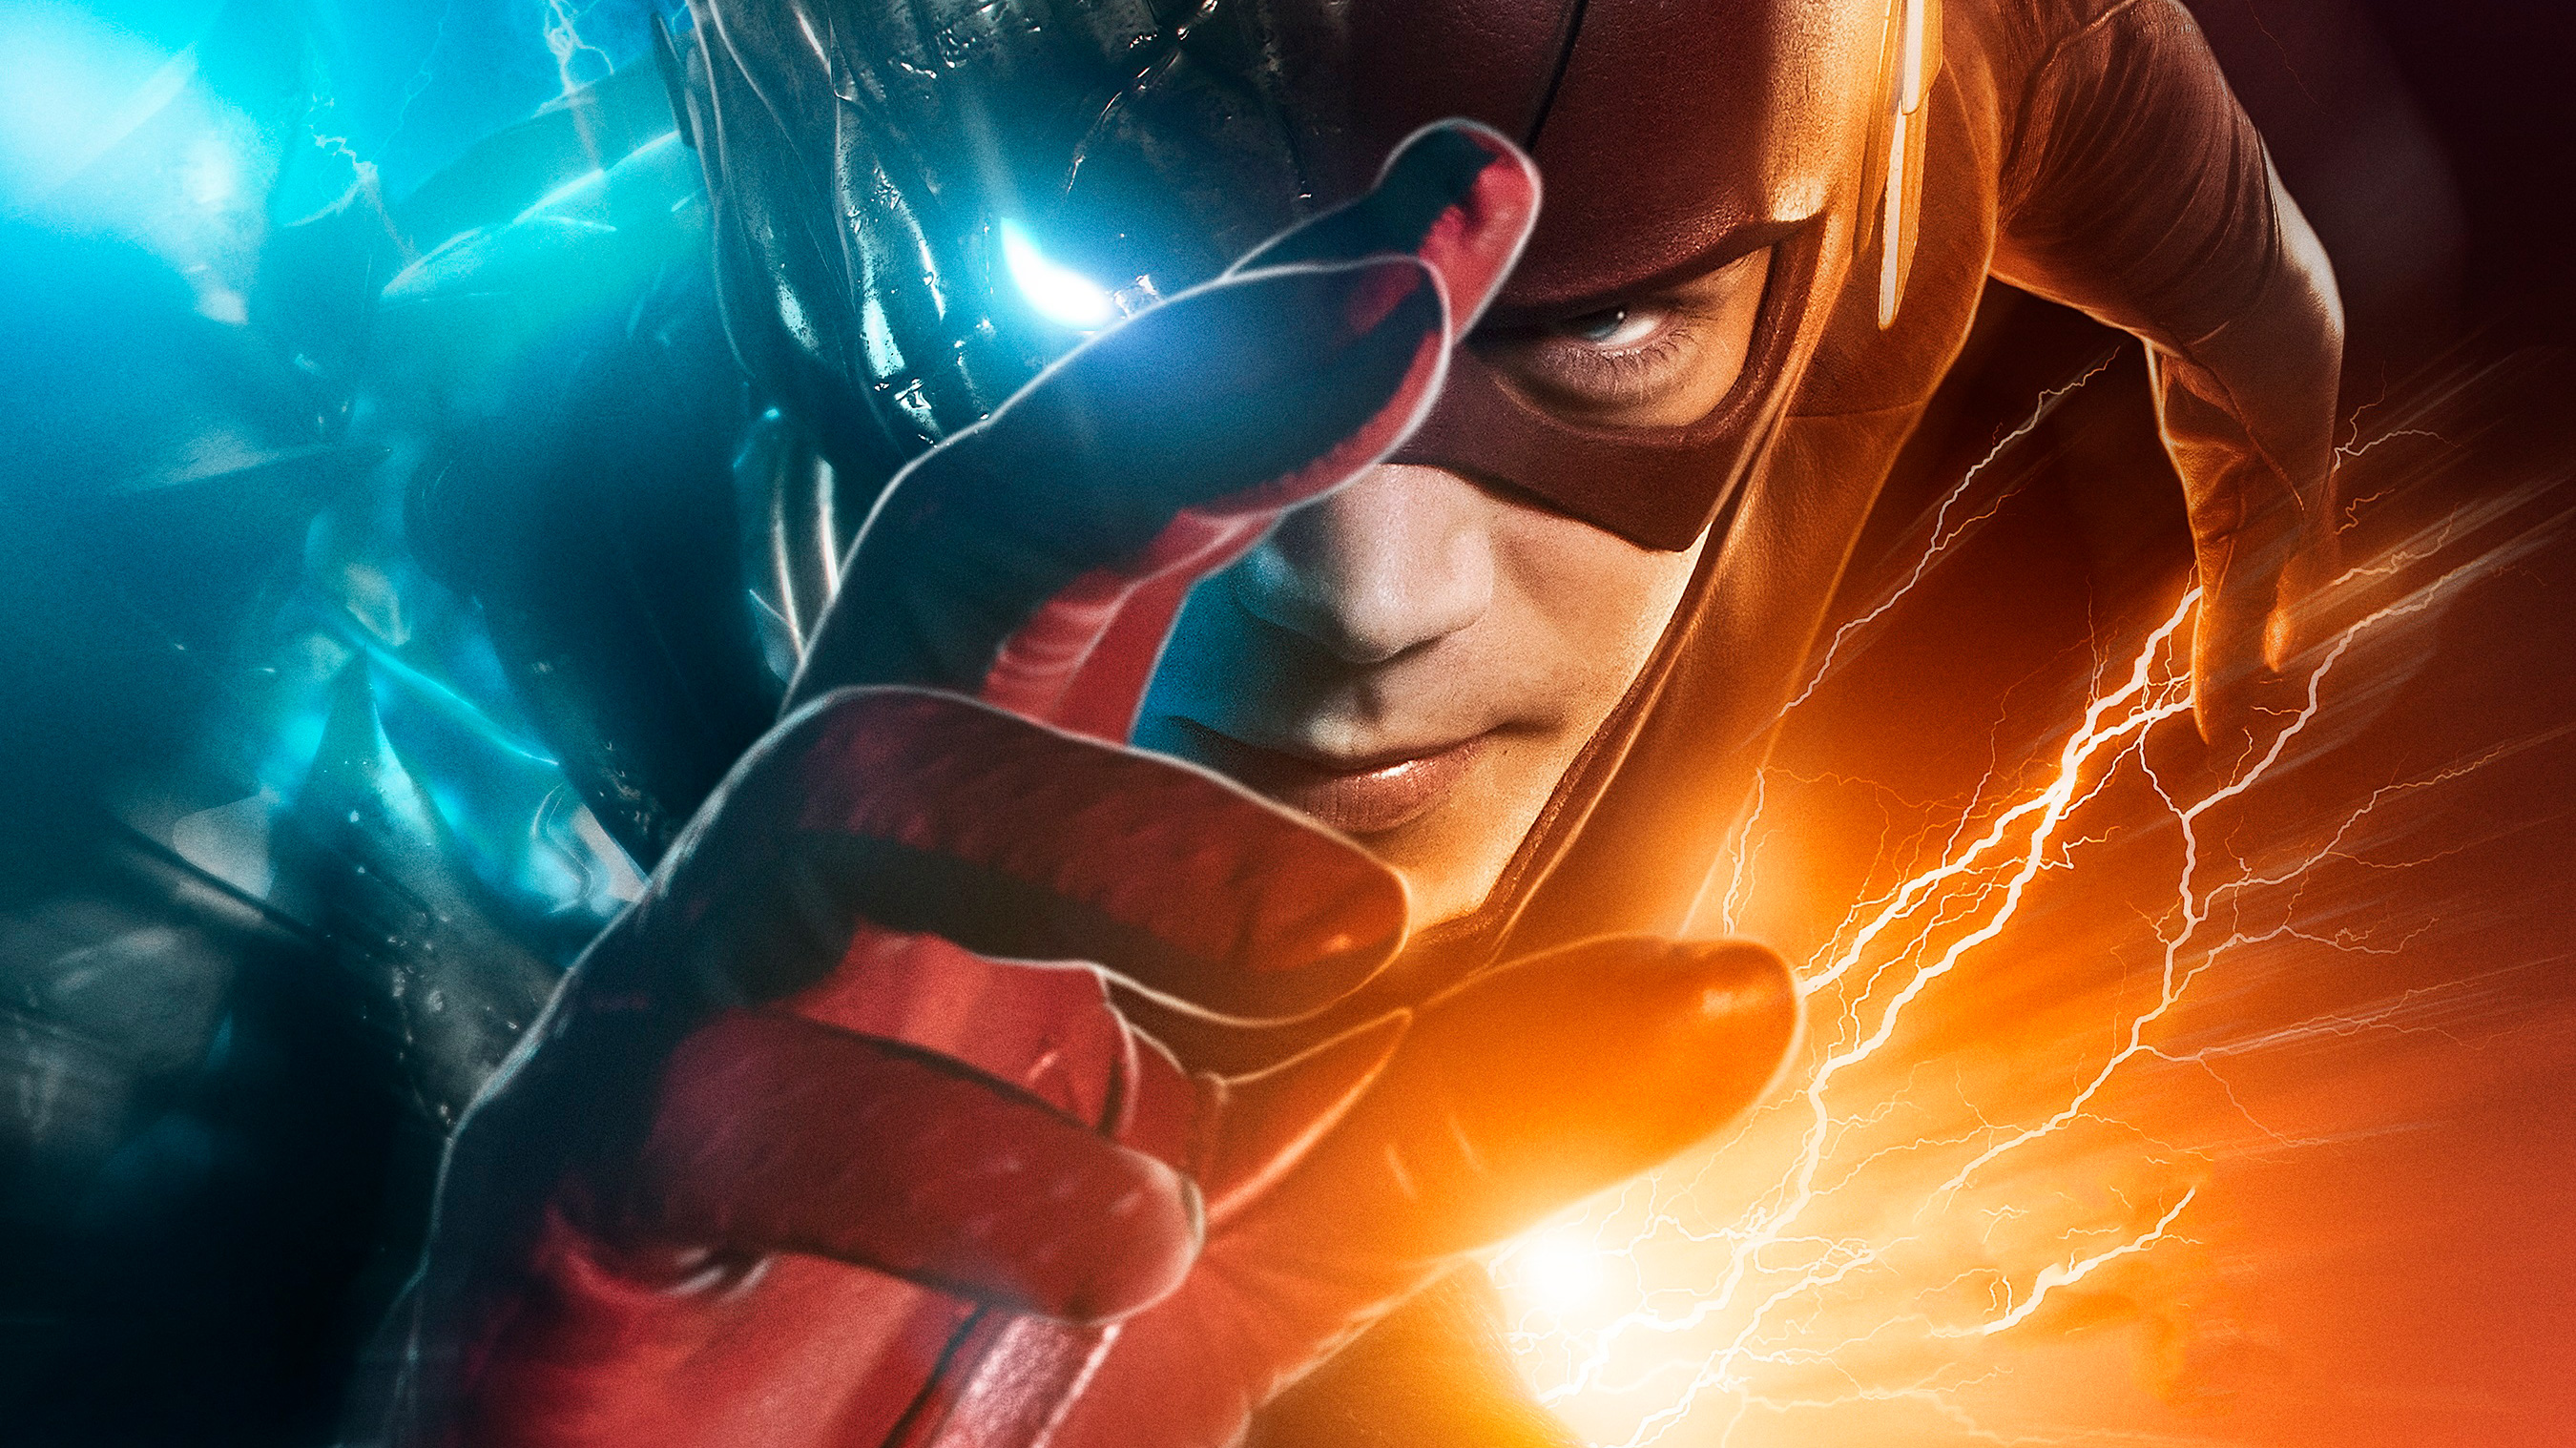 The Flash Tv Show 2017, HD Tv Shows, 4k Wallpapers, Images, Backgrounds